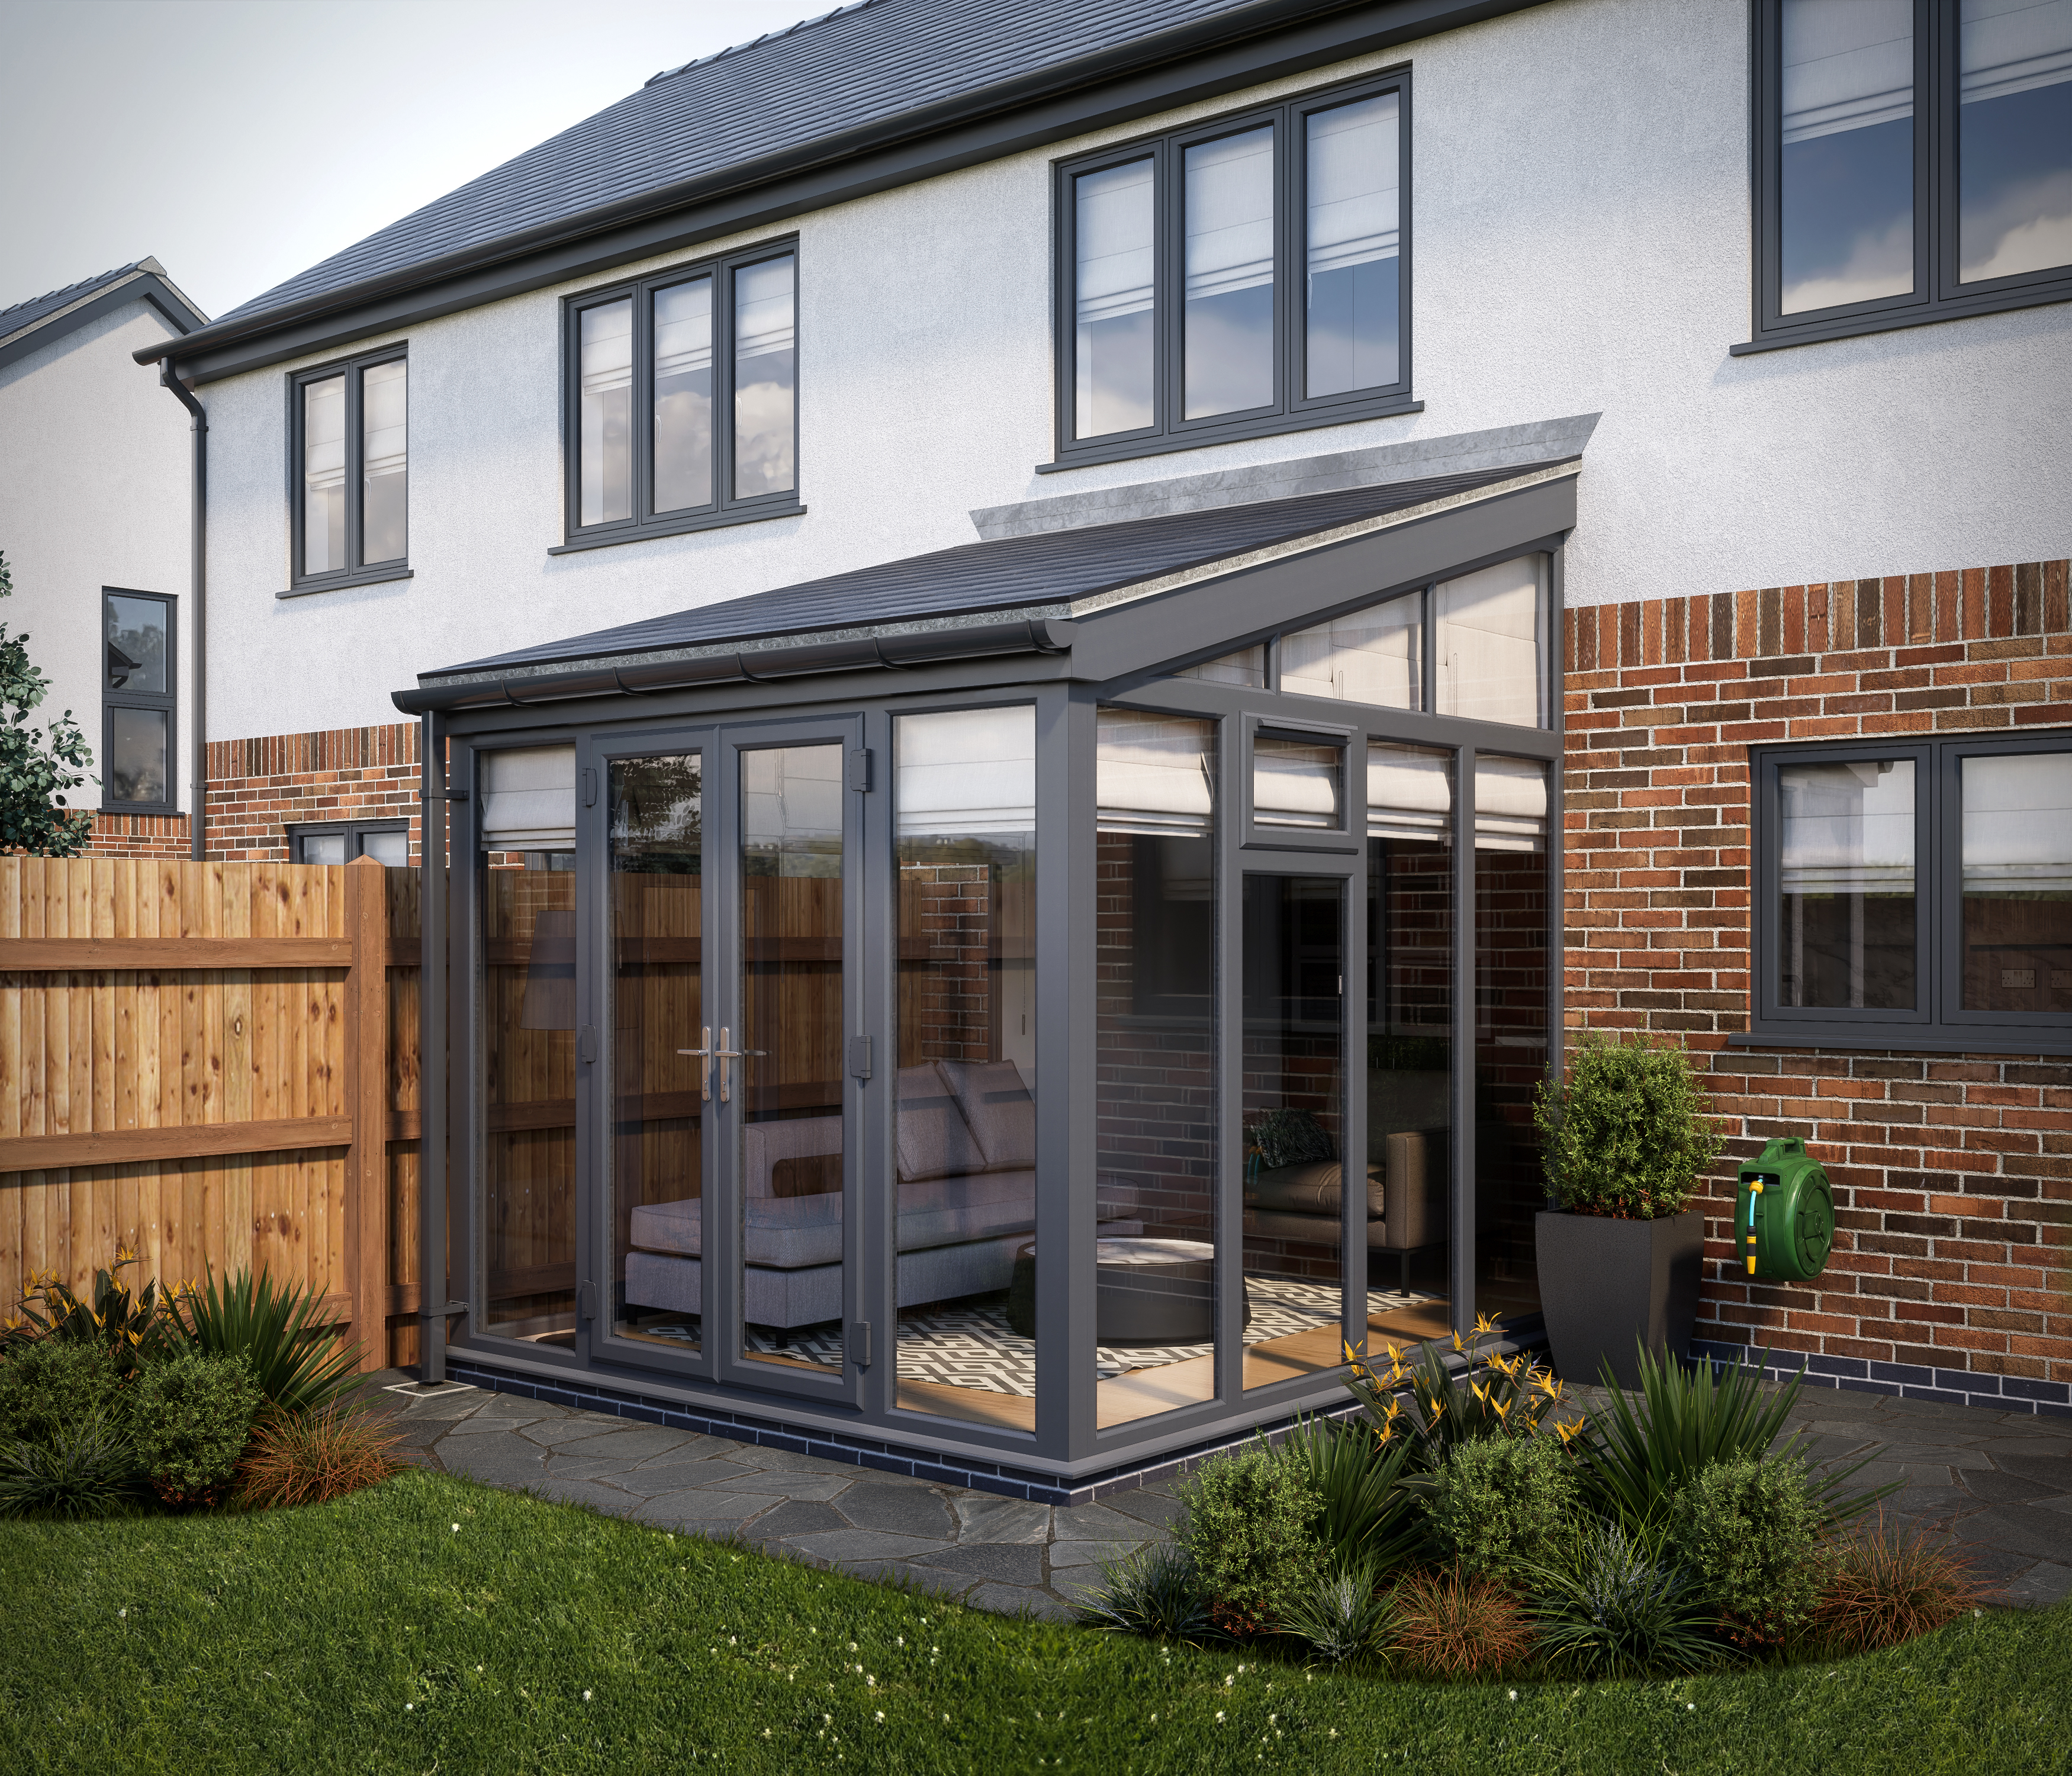 SOLid roof Full height Lean to Conservatory Grey Frames with Titanium Grey Tiles